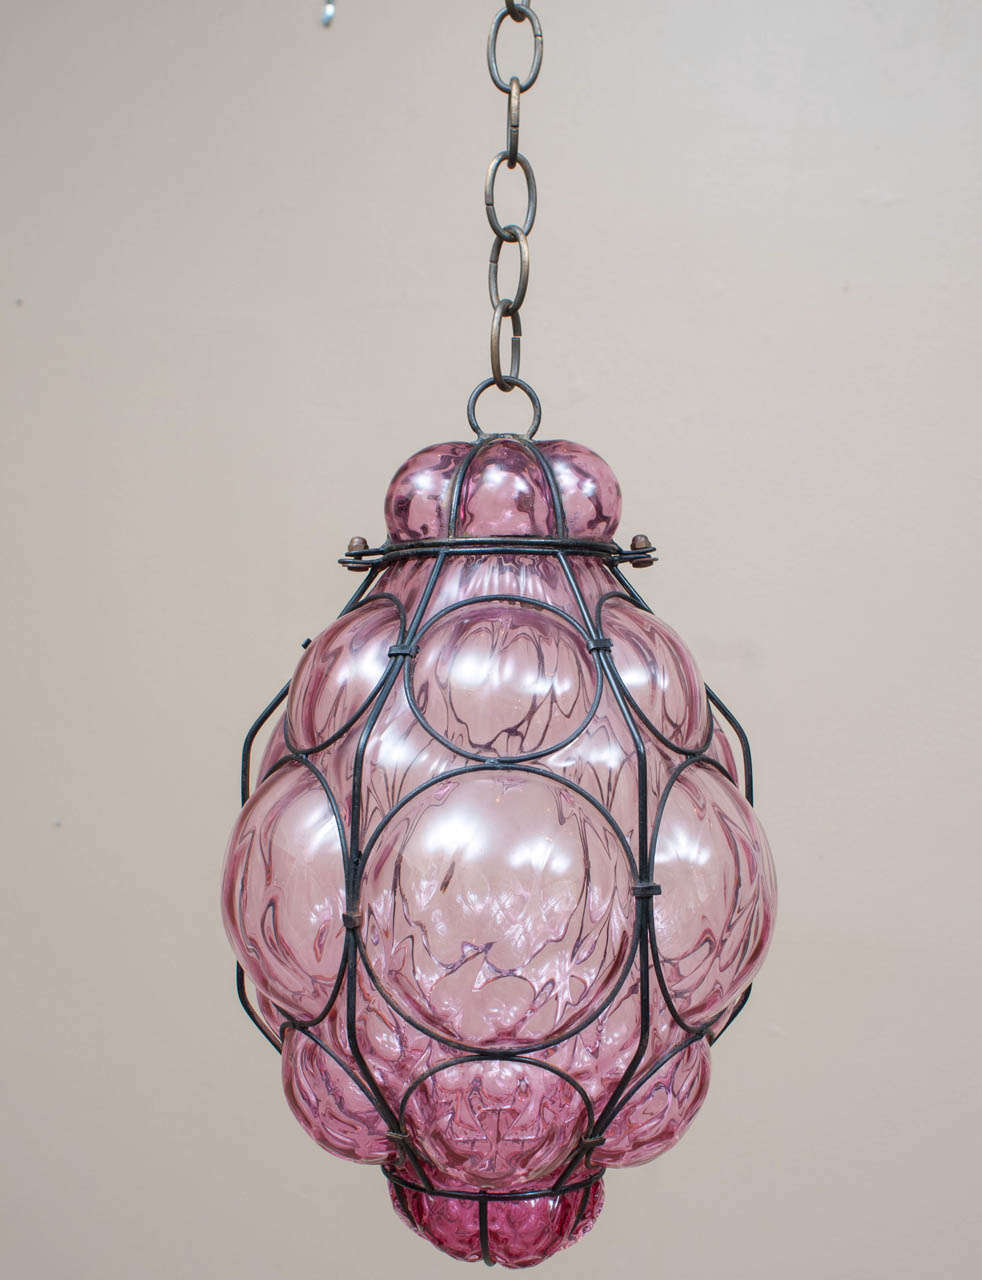 The pale wine-colored Venetian glass on this lantern was hand-blown in a mold and the wire skeleton was then hand-applied to the glass - the metal has nice evidence of age which gives the lantern a beautiful patina - 3 lights - comes apart for bulb